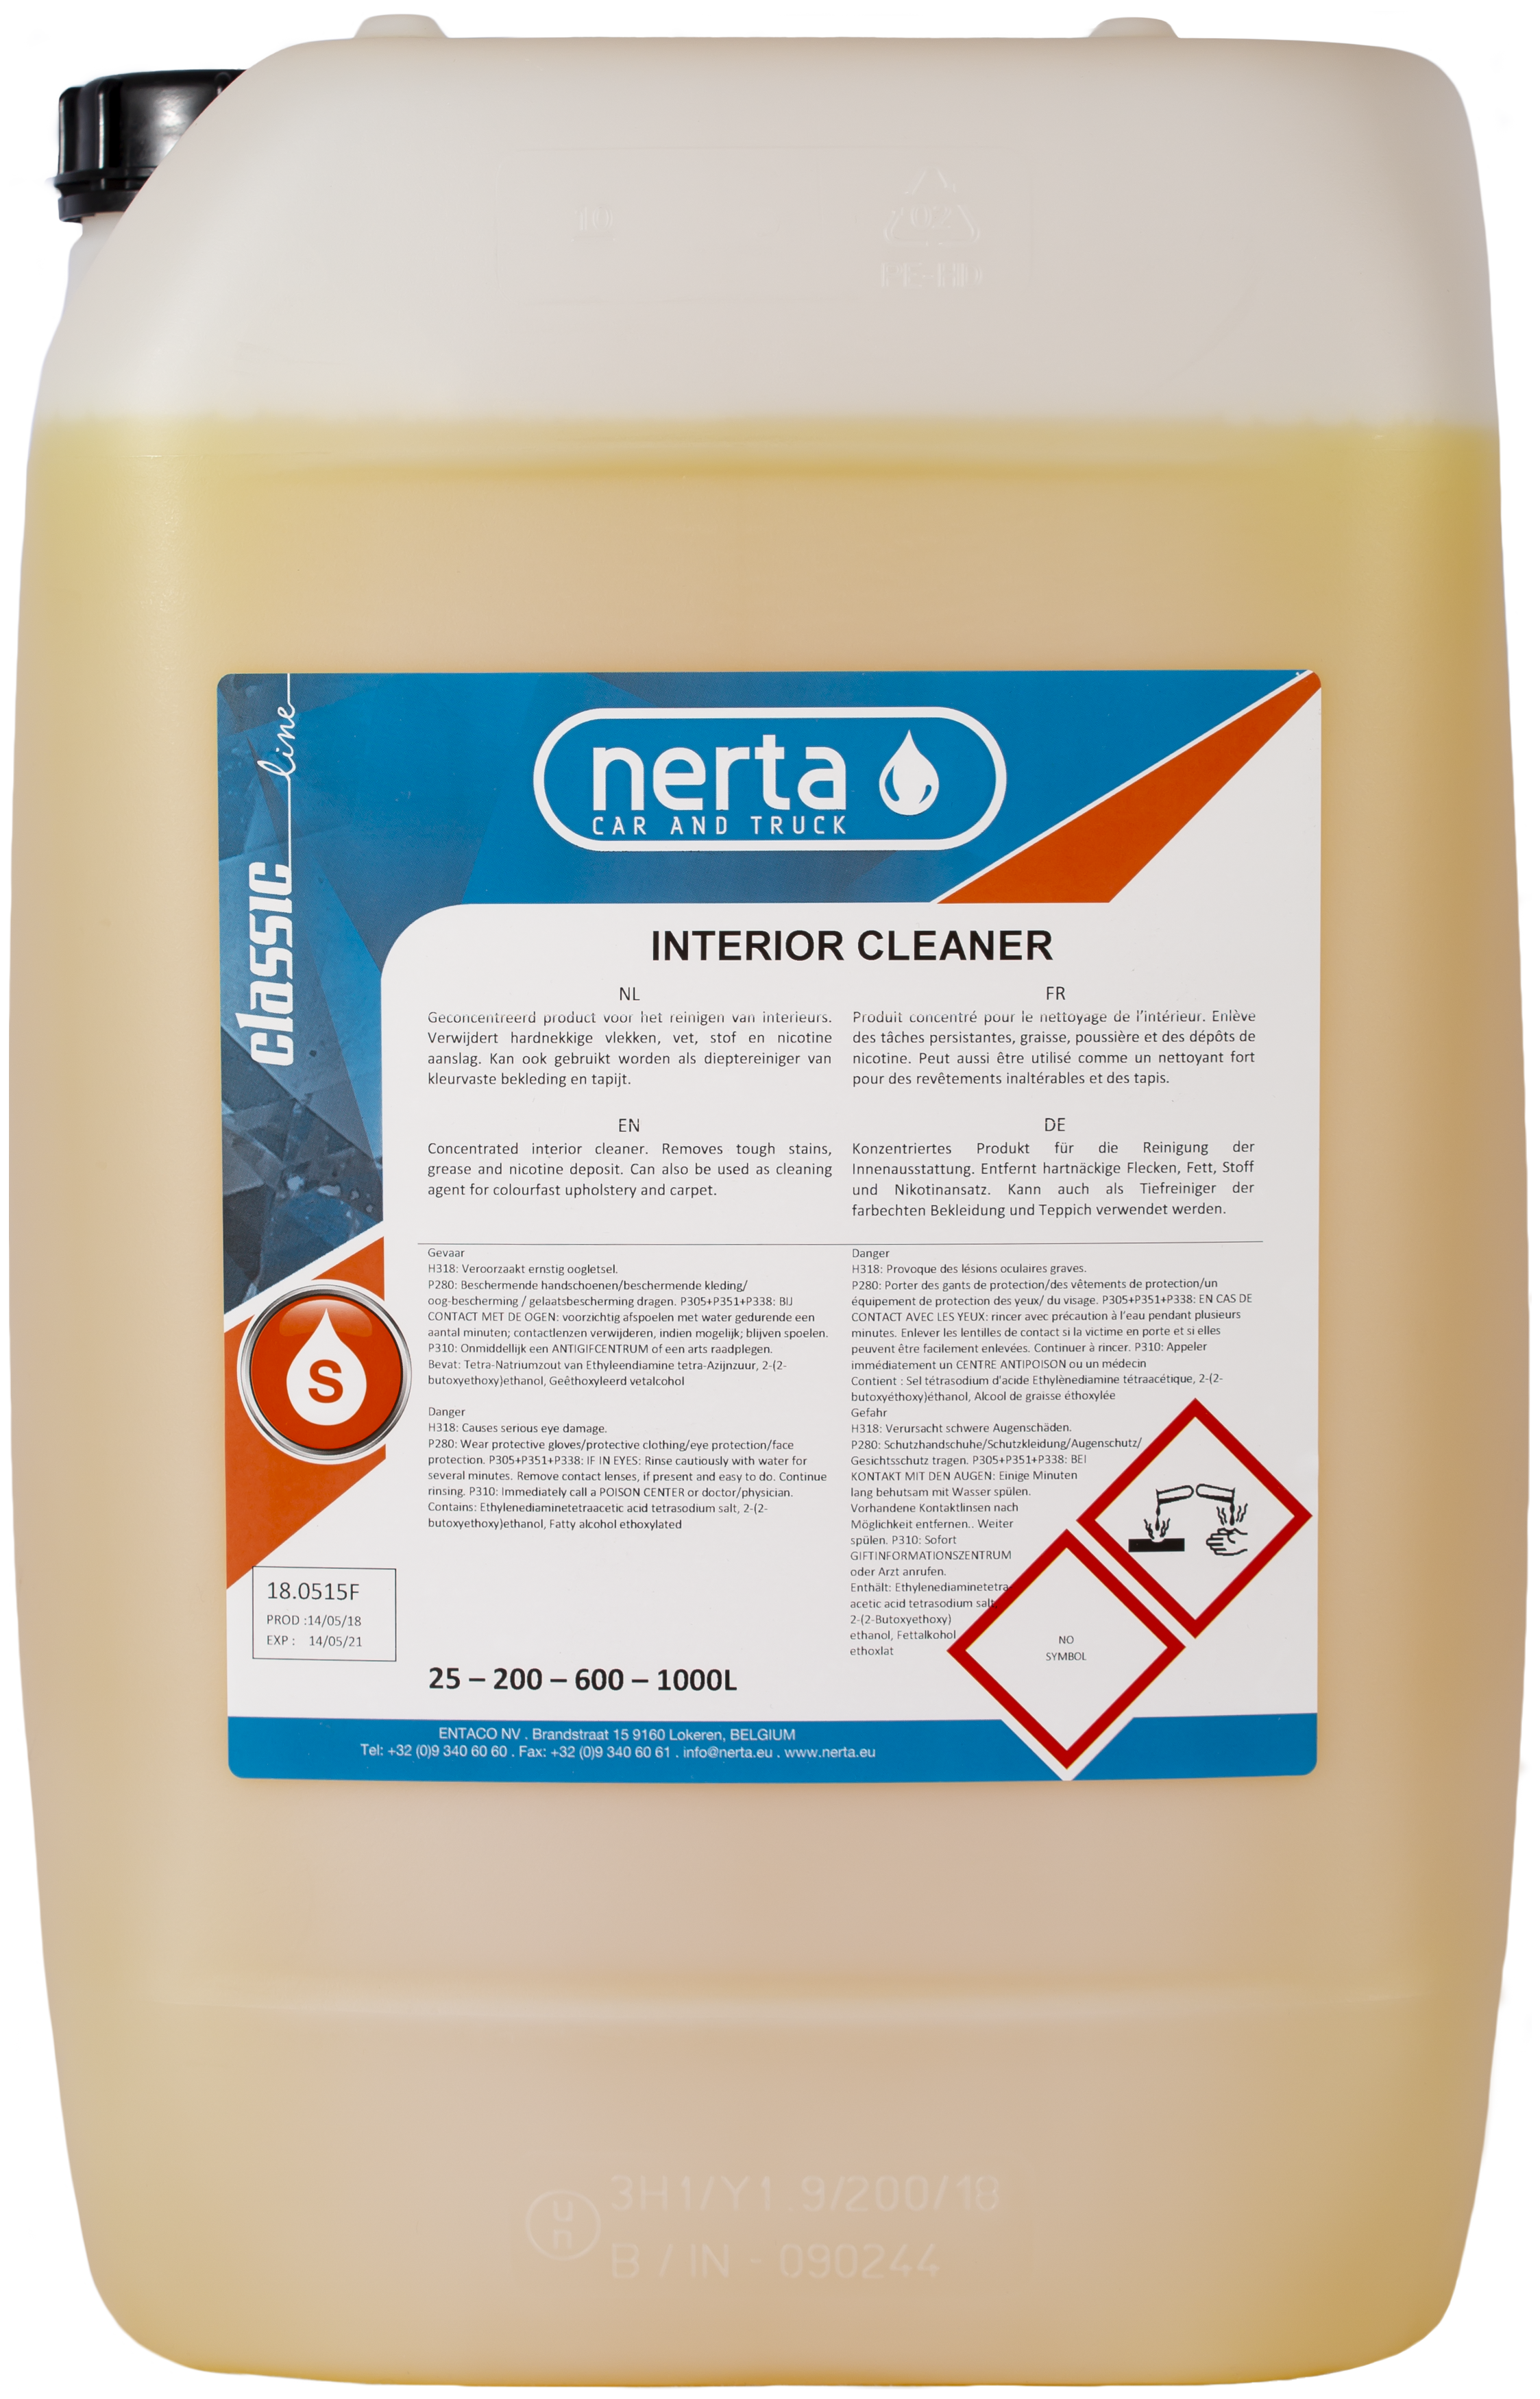 Interior Cleaner Nerta Professional Cleaning Products